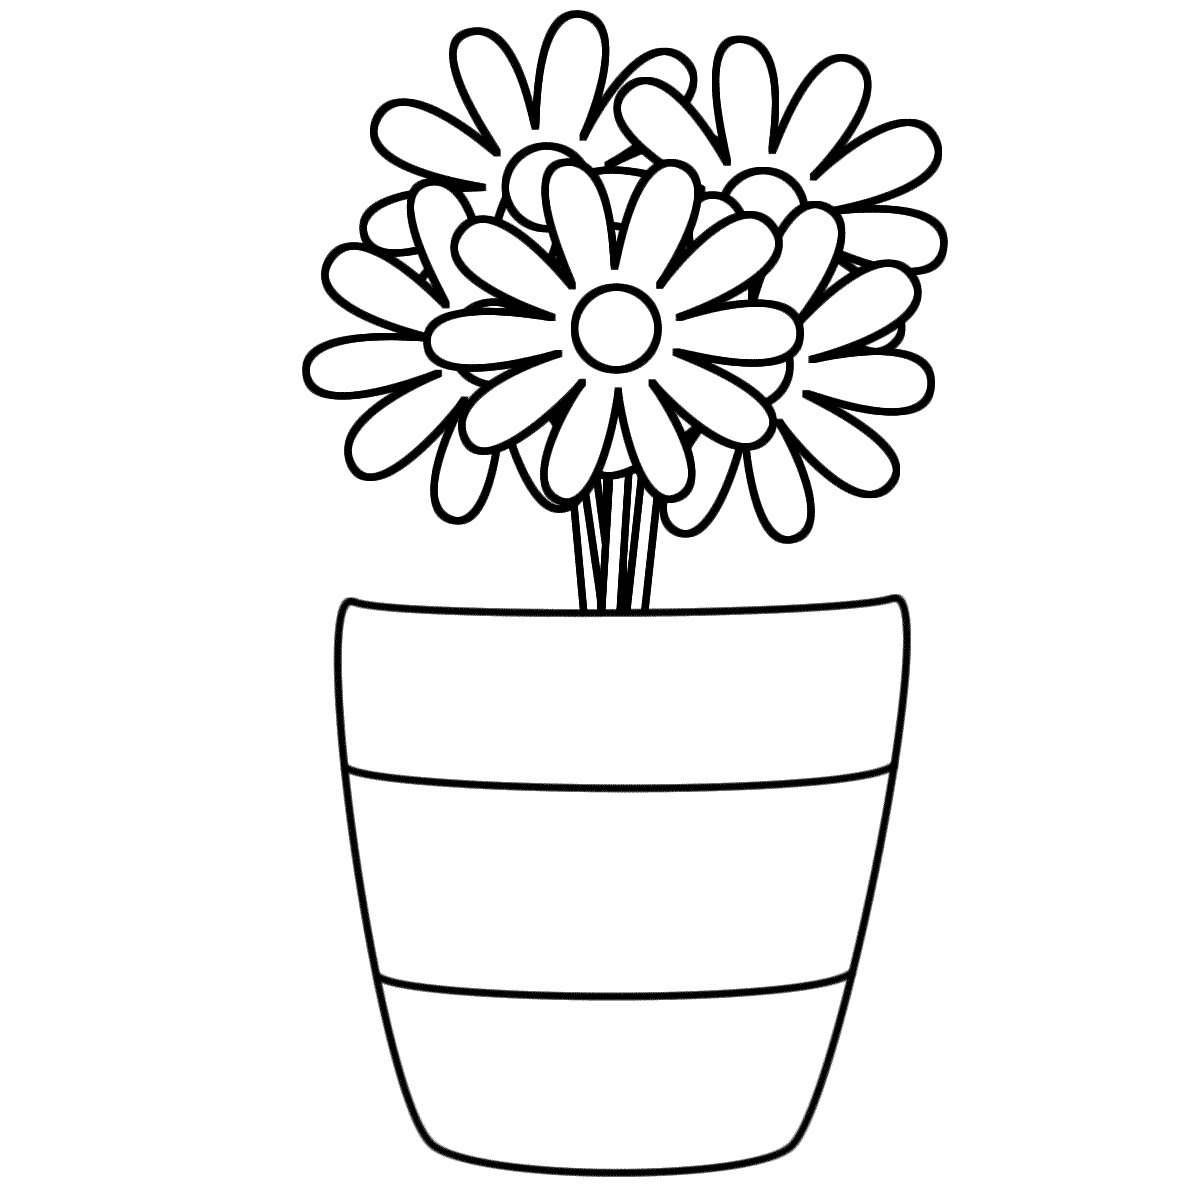 Vase With Flowers Cute Coloring Page